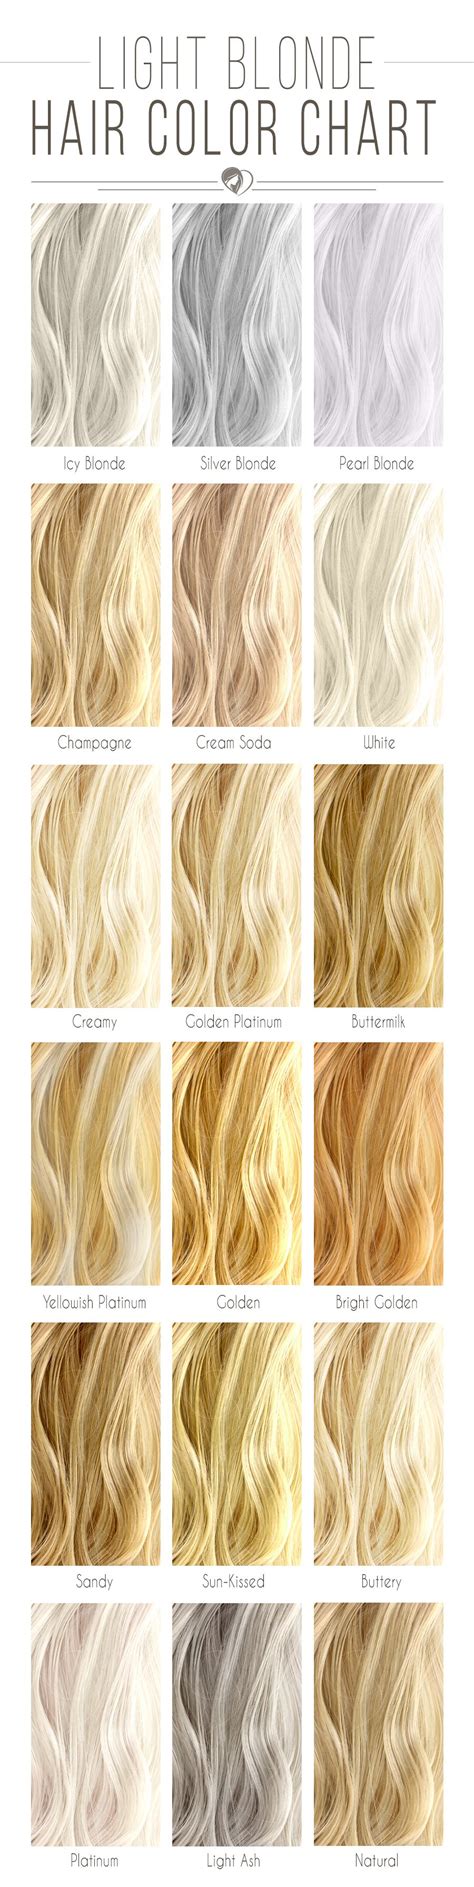 Blonde Hair Color Chart The Shades Kissed By The Sun Blonde Hair Color Chart Hair Color